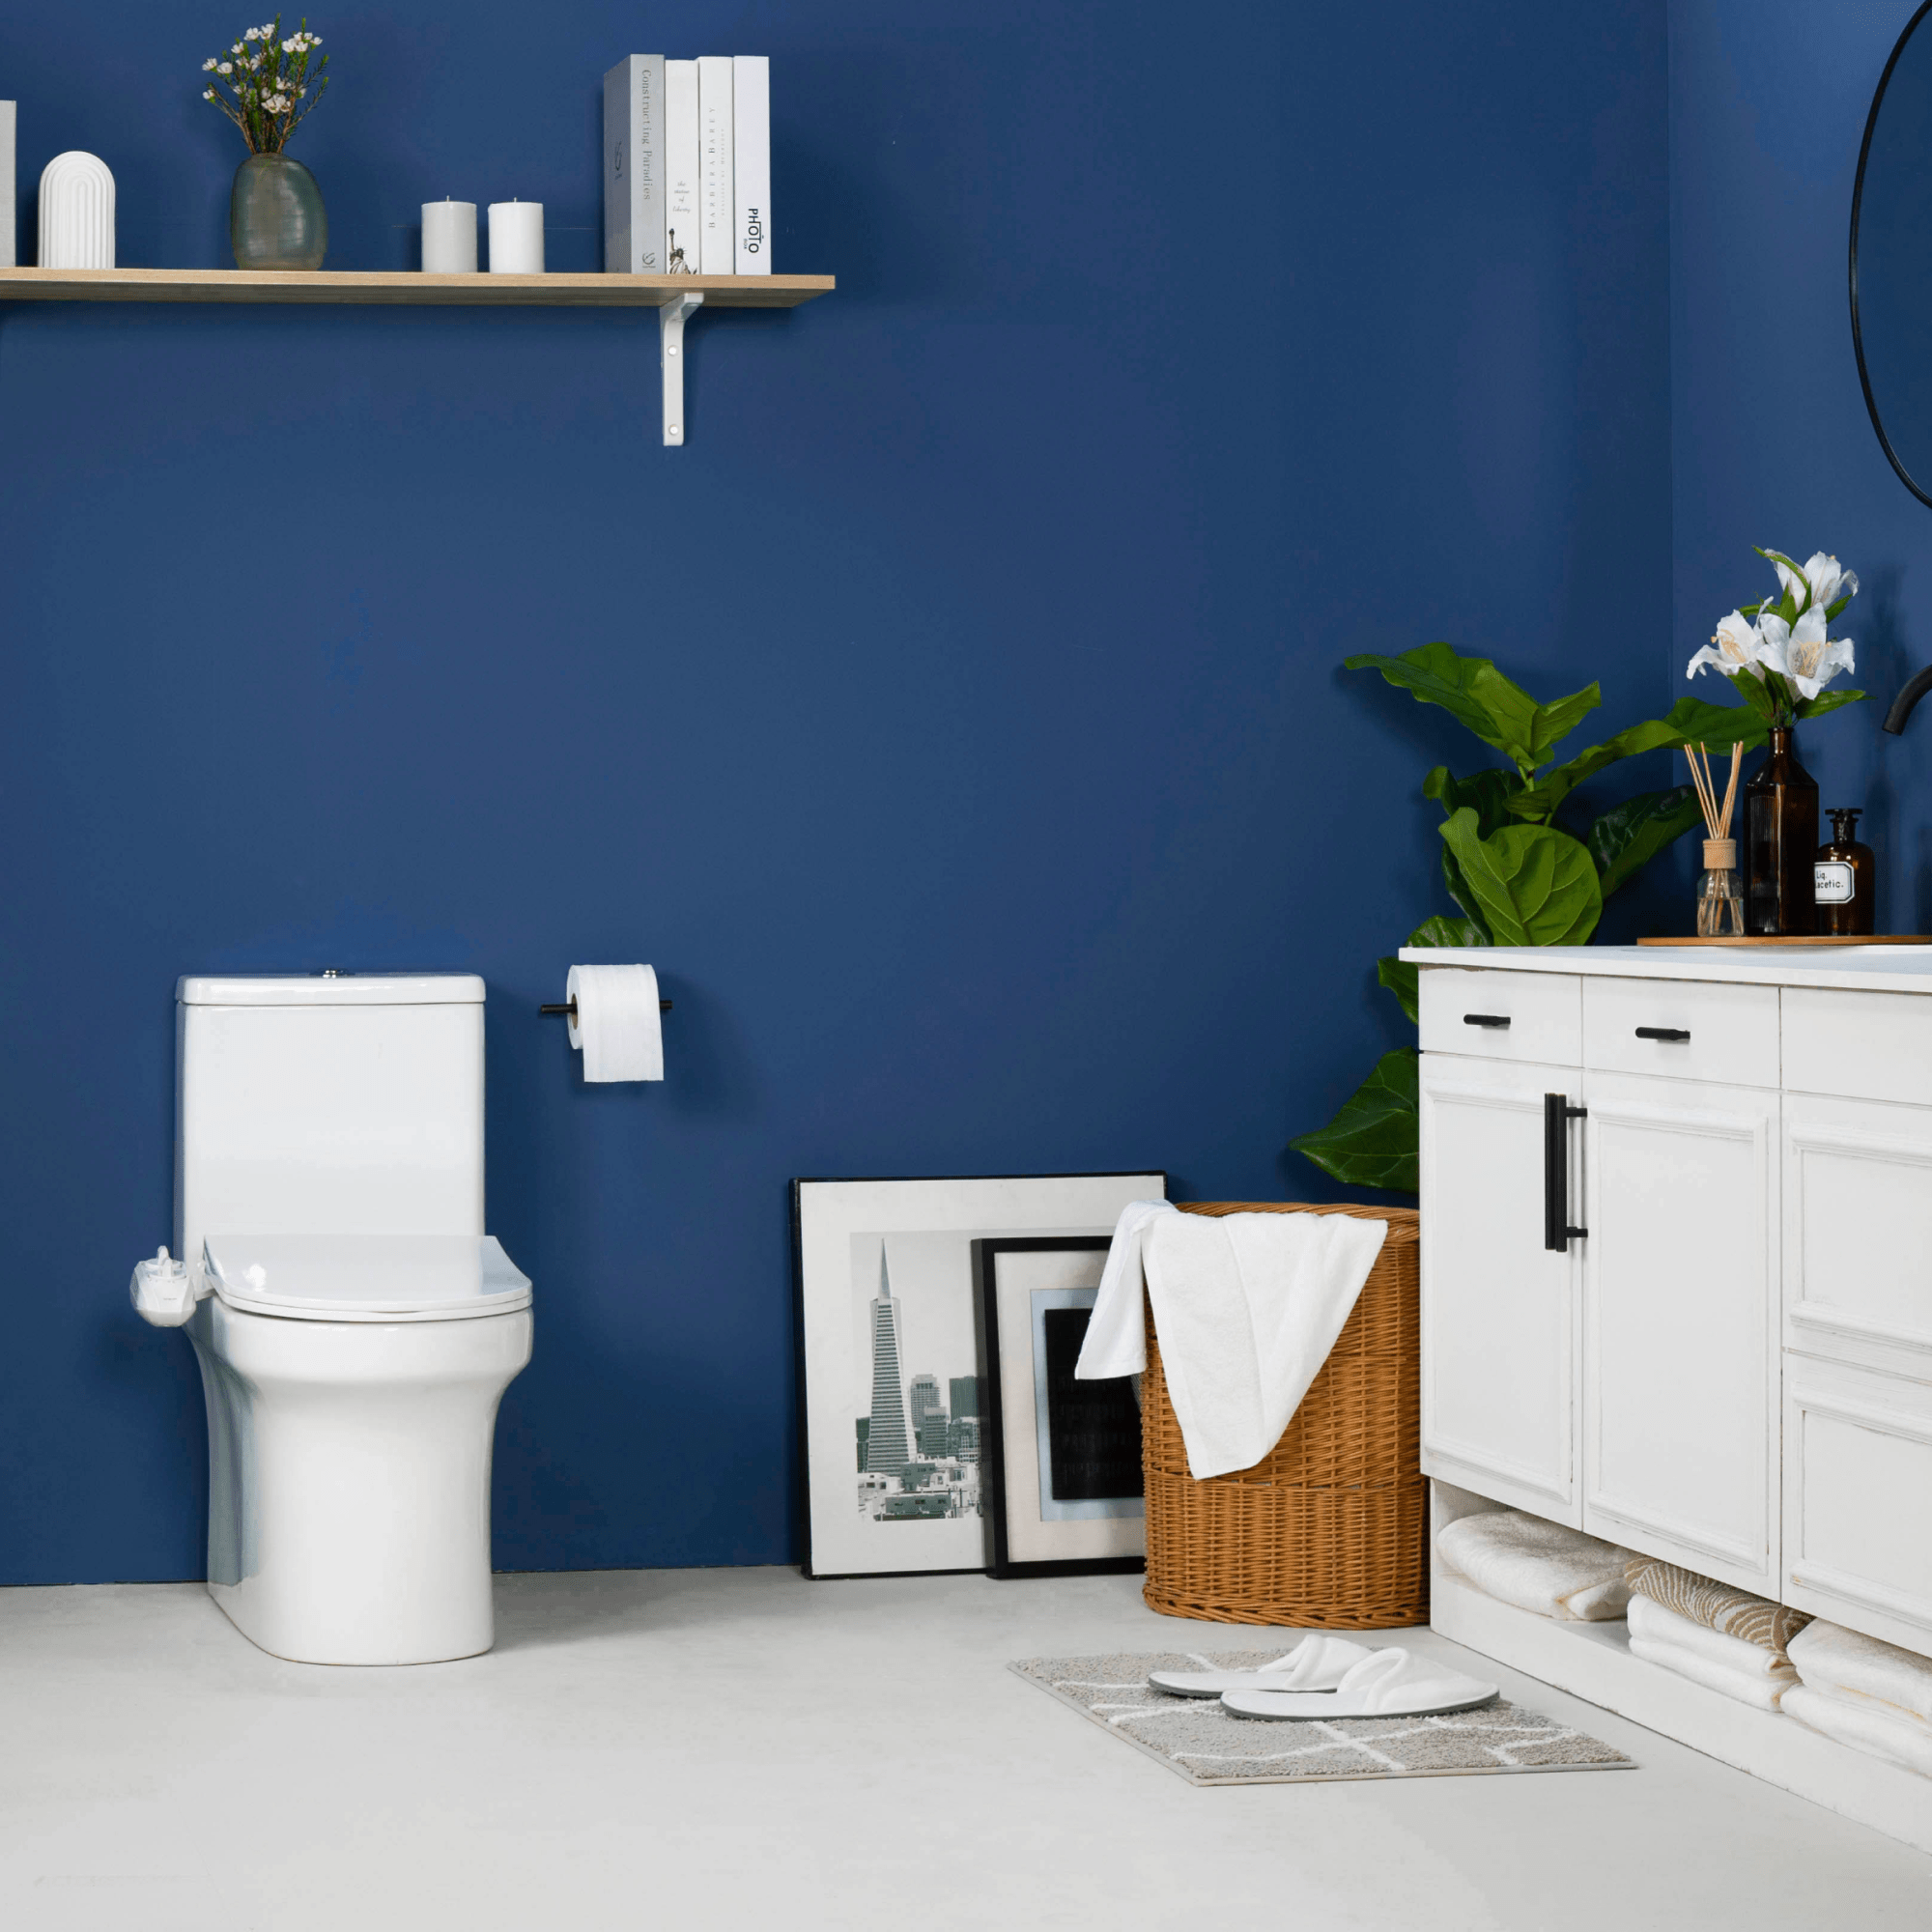 NEO 185 Plus White installed on a toilet, in a modern blue bathroom with a cabinet, paintings, and basket of towels